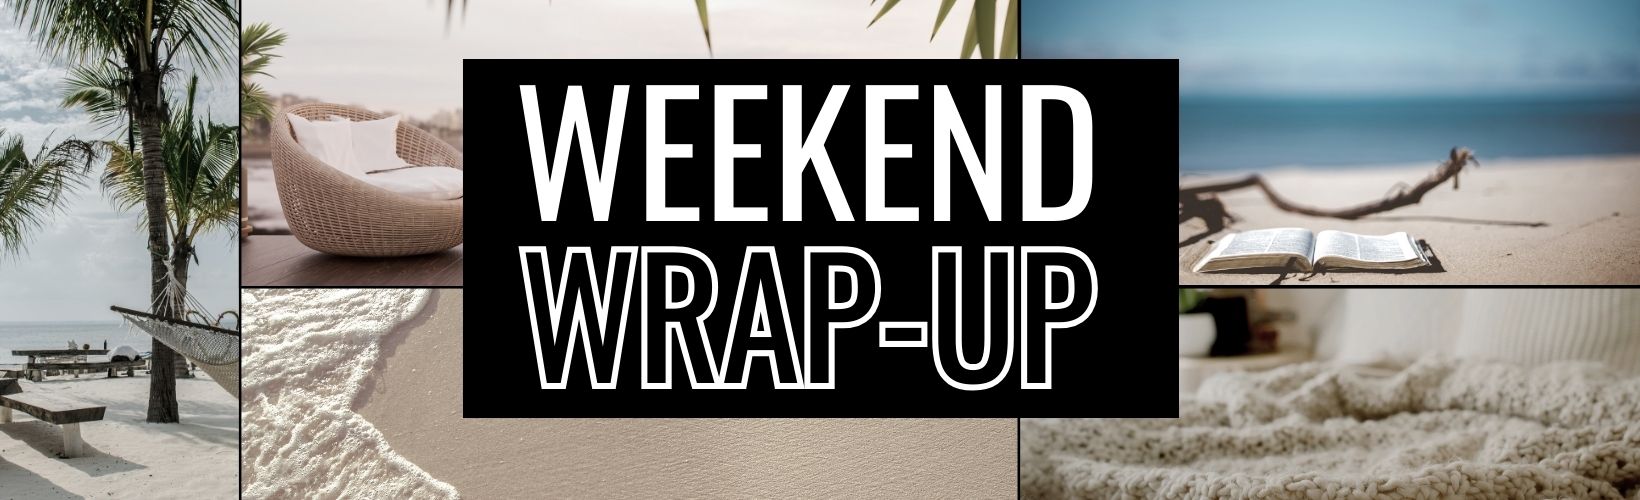 Weekend Wrap Up: How to Reflect on Your Weekend and Prepare for the Week Ahead